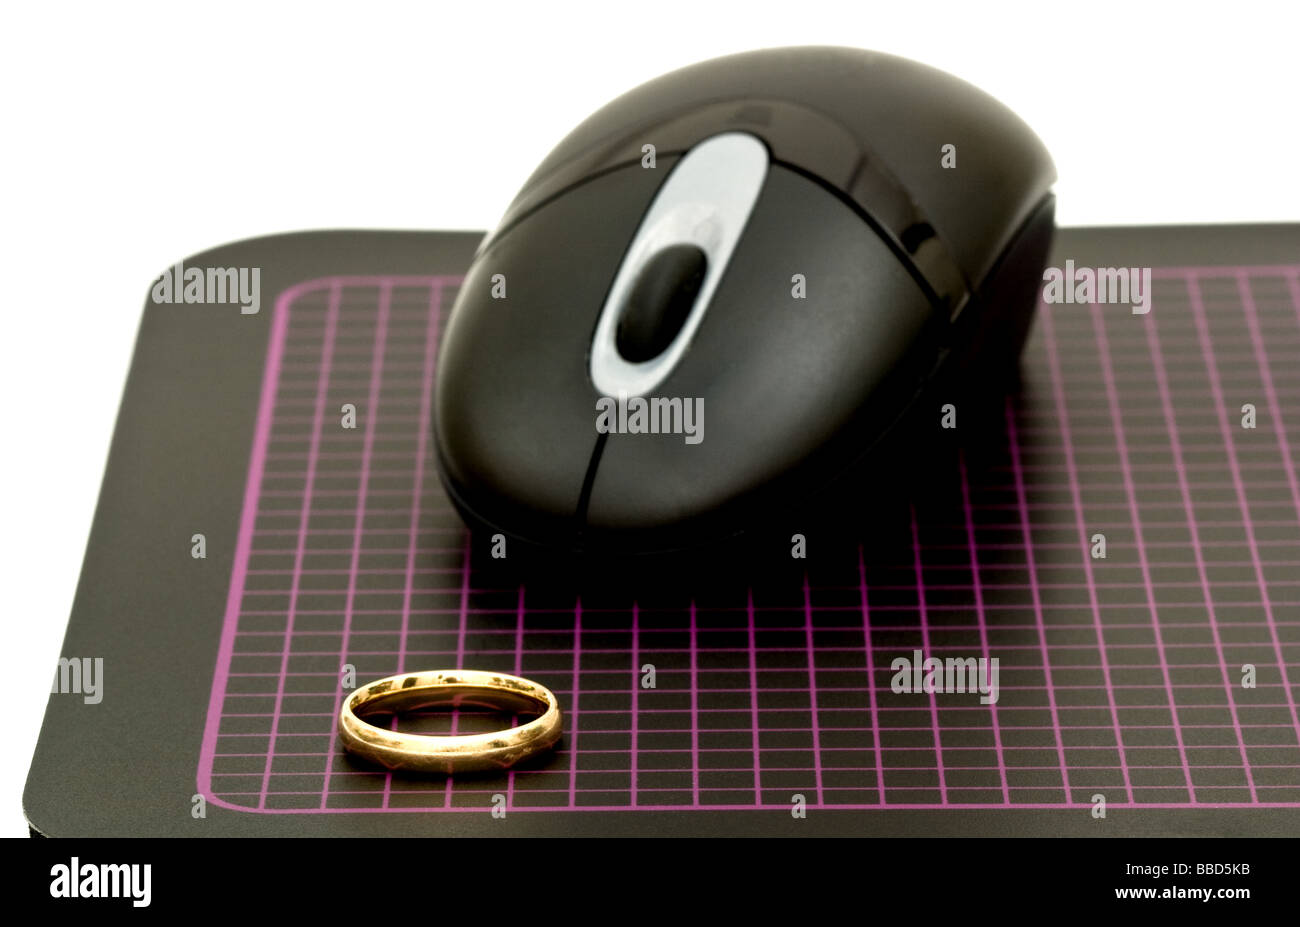 Cordless laser mouse on a patterned mouse pad pointing towards a wedding  ring Stock Photo - Alamy